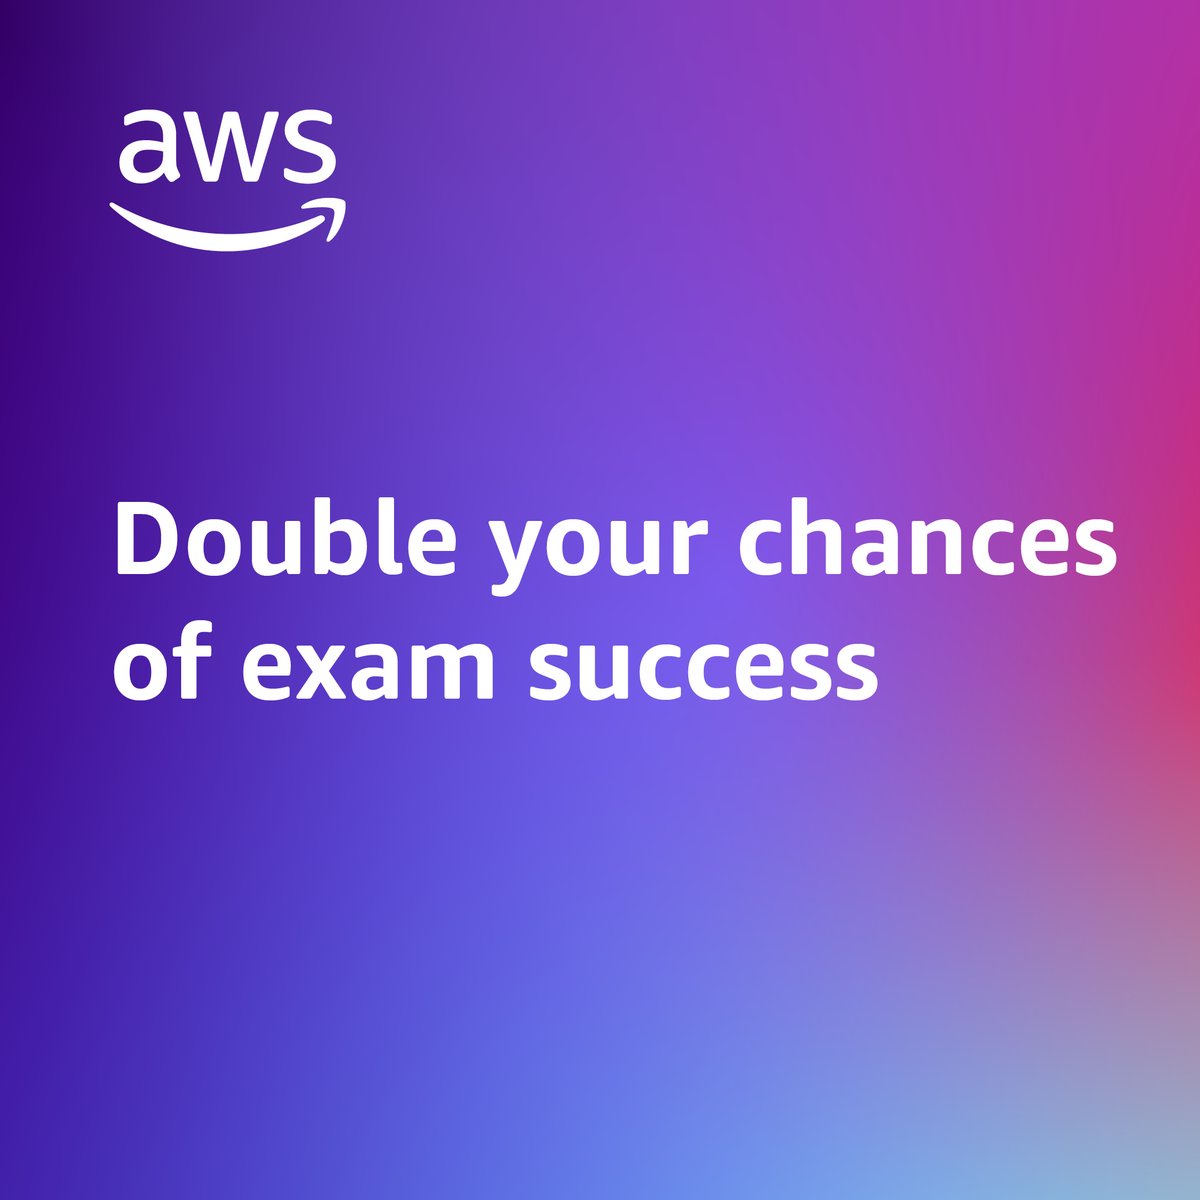 Do you want 2 chances to advance your career in the cloud? Schedule your #AWSCertification exam with Pearson VUE before April 15, 2024 & get a free retake (if you need it). Get the promo code now 👉 go.aws/3Oymvv0